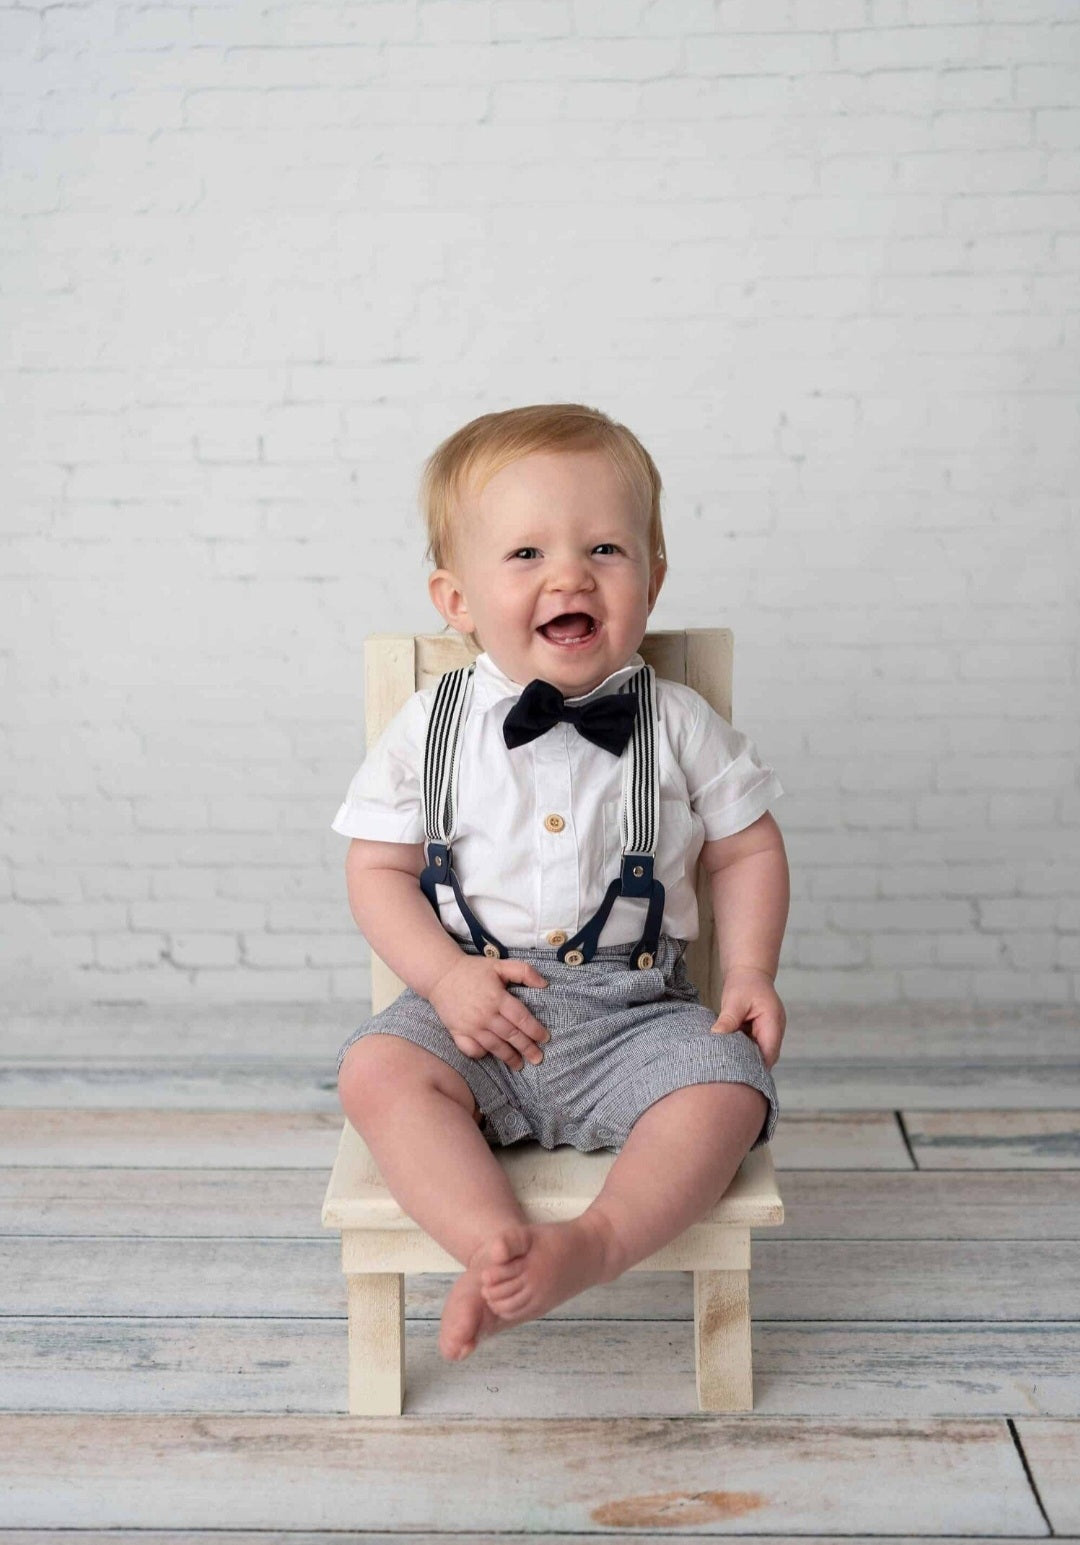 Gentleman Suit White Short Sleeve Shirts with Shorts, Suspenders and Bowtie